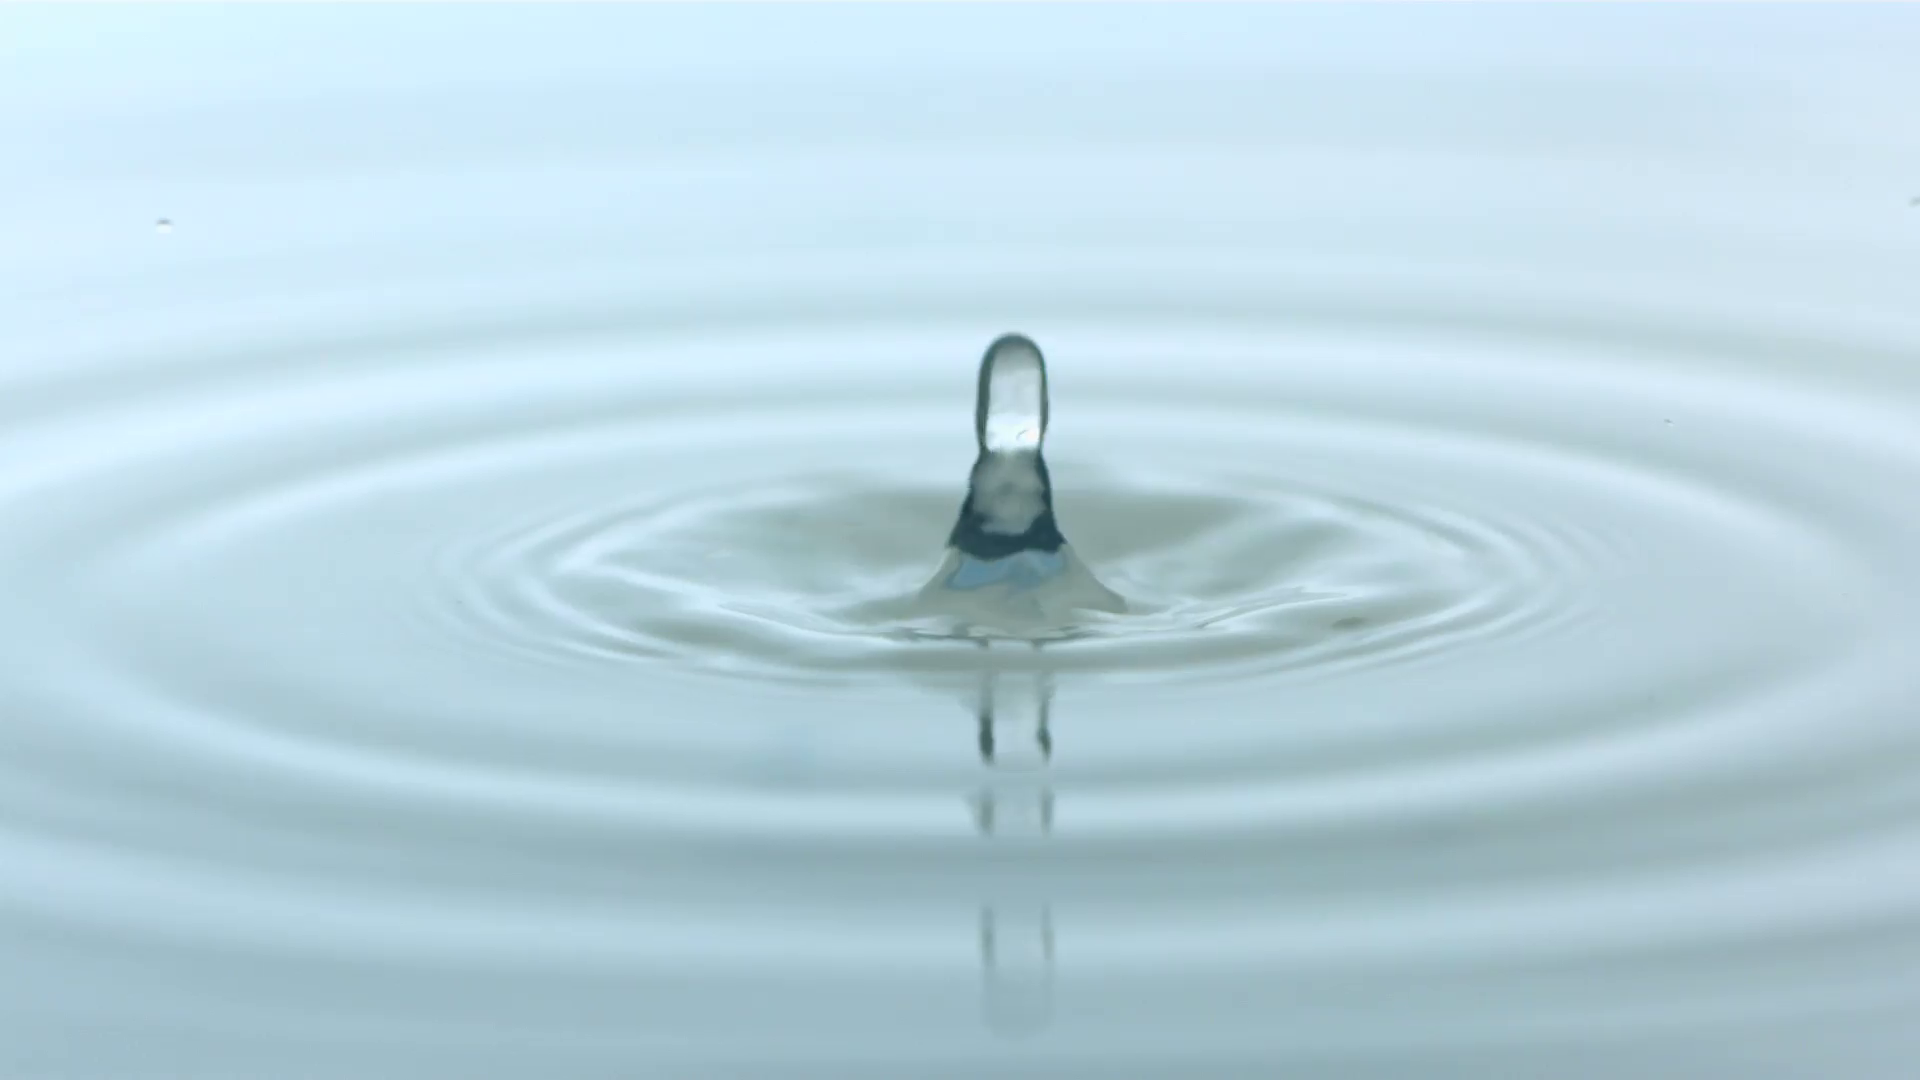 Slow Motion Rippling Water Droplets Up Close Stock Video Footage ...